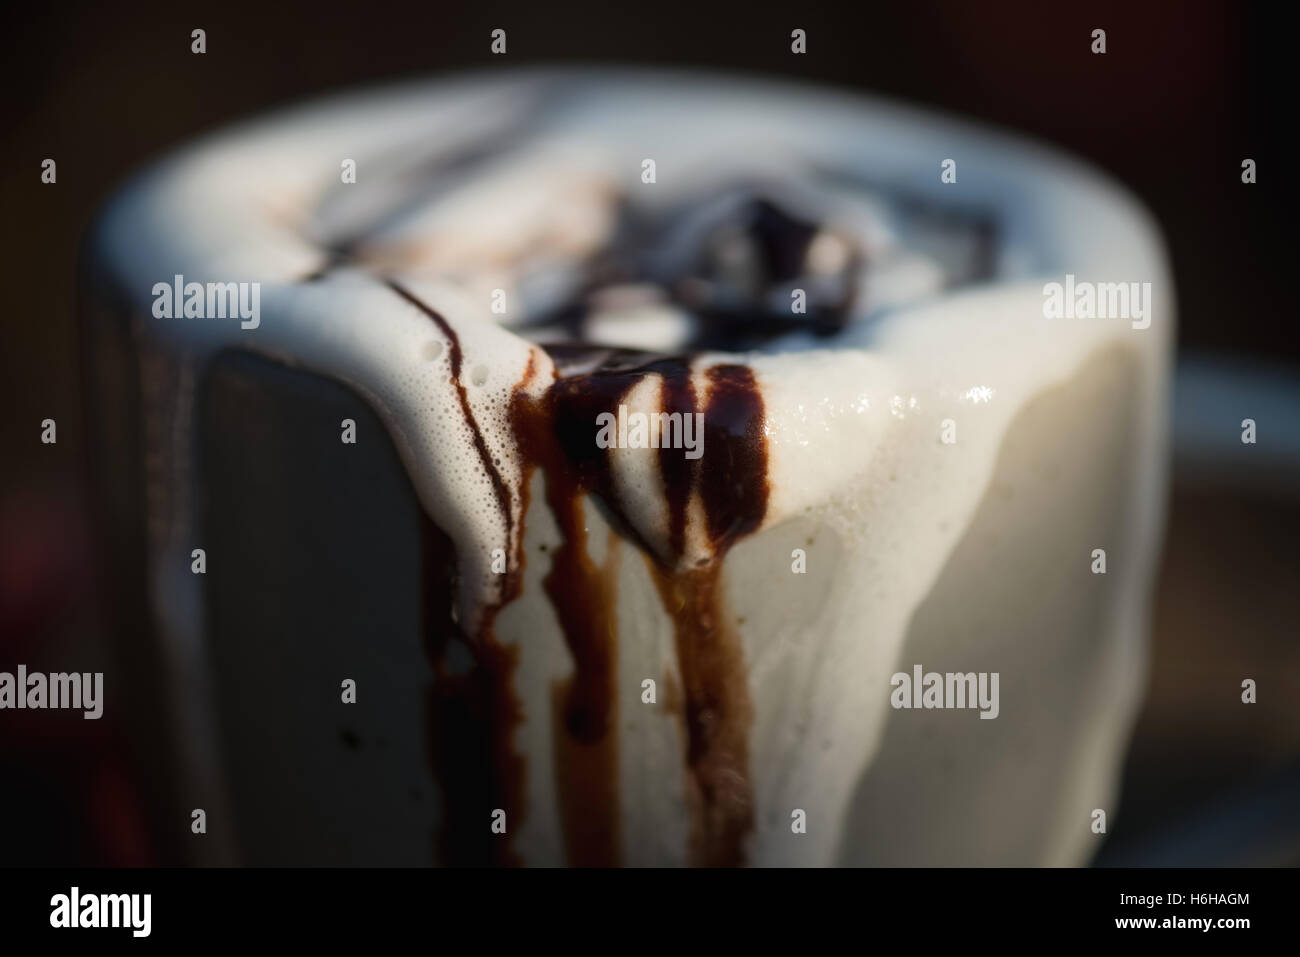 Very messy hot chocolate with whipped cream and chocolate sauce overflowing a mug set on tree stump Stock Photo